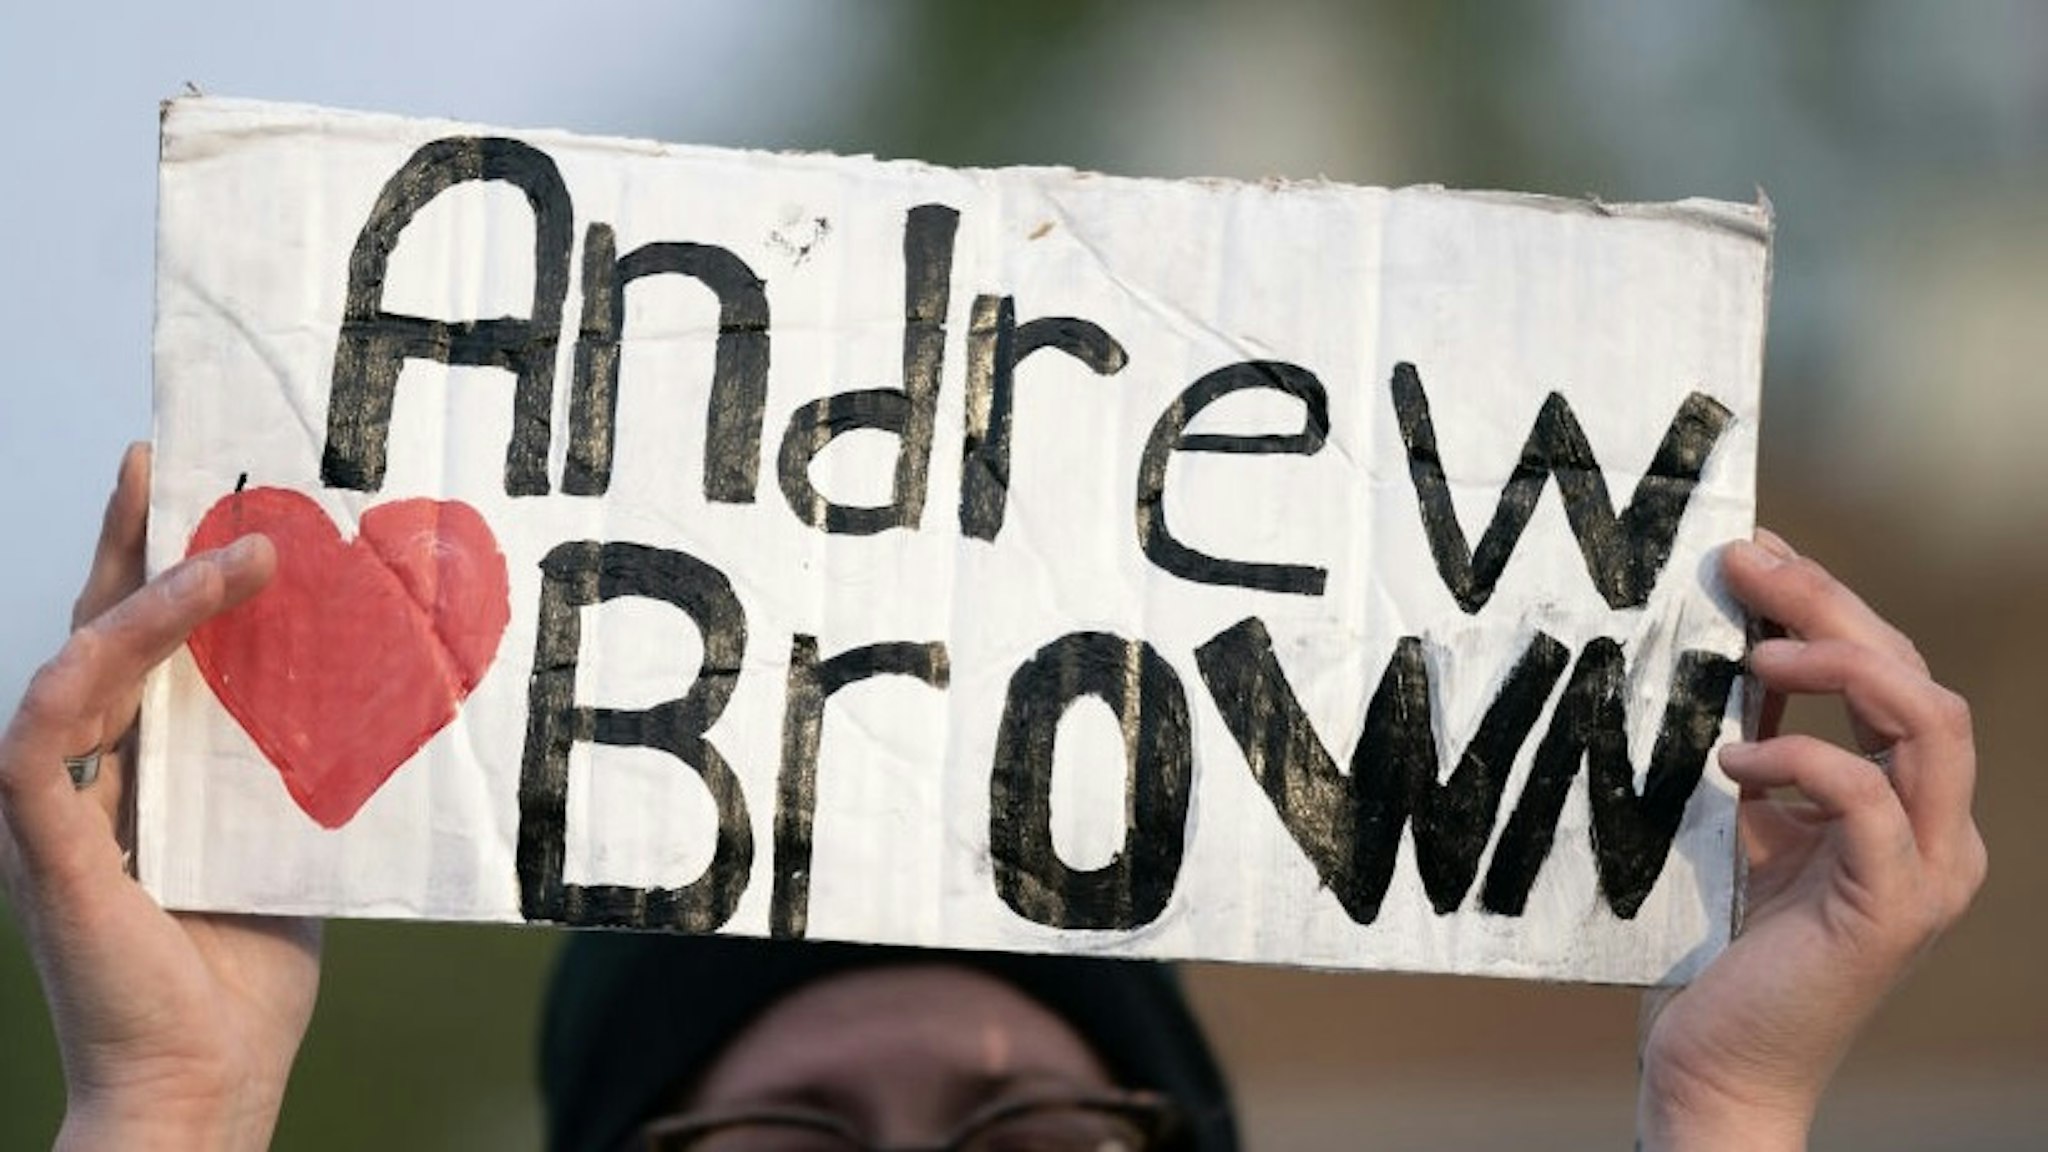 ELIZABETH CITY, NC - APRIL 22: A demonstrator holds a sign for Andrew Brown Jr. during a protest march on April 22, 2021 in Elizabeth City, North Carolina. The protest was sparked by the police killing of Brown on April 21. (Photo by Sean Rayford/Getty Images)